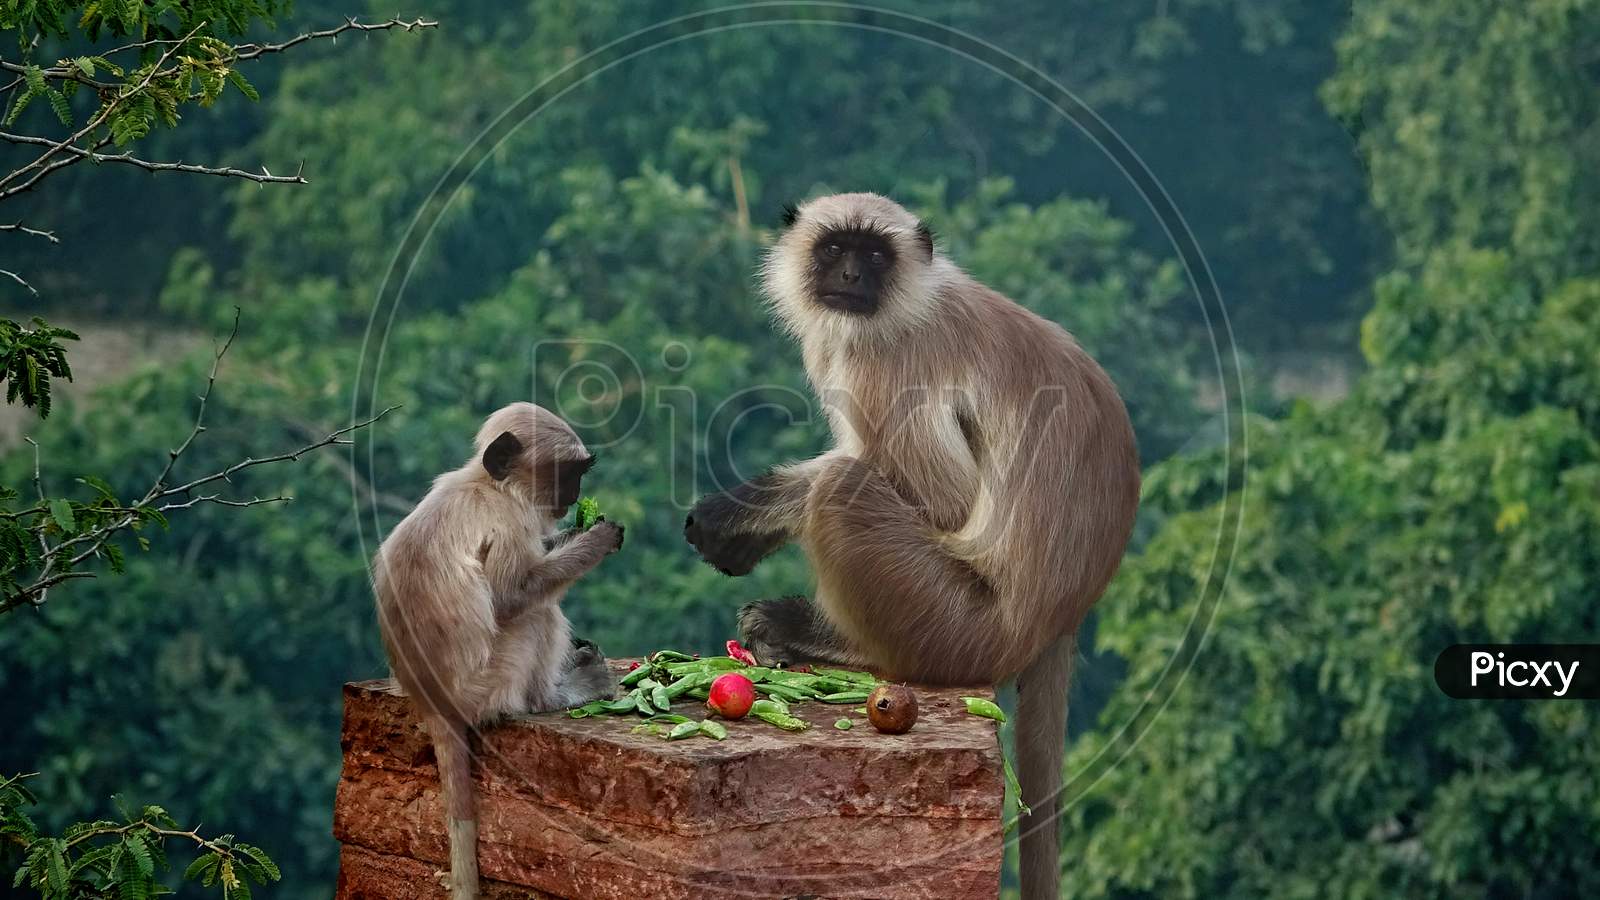 baby monkey and his mother eating fruit.